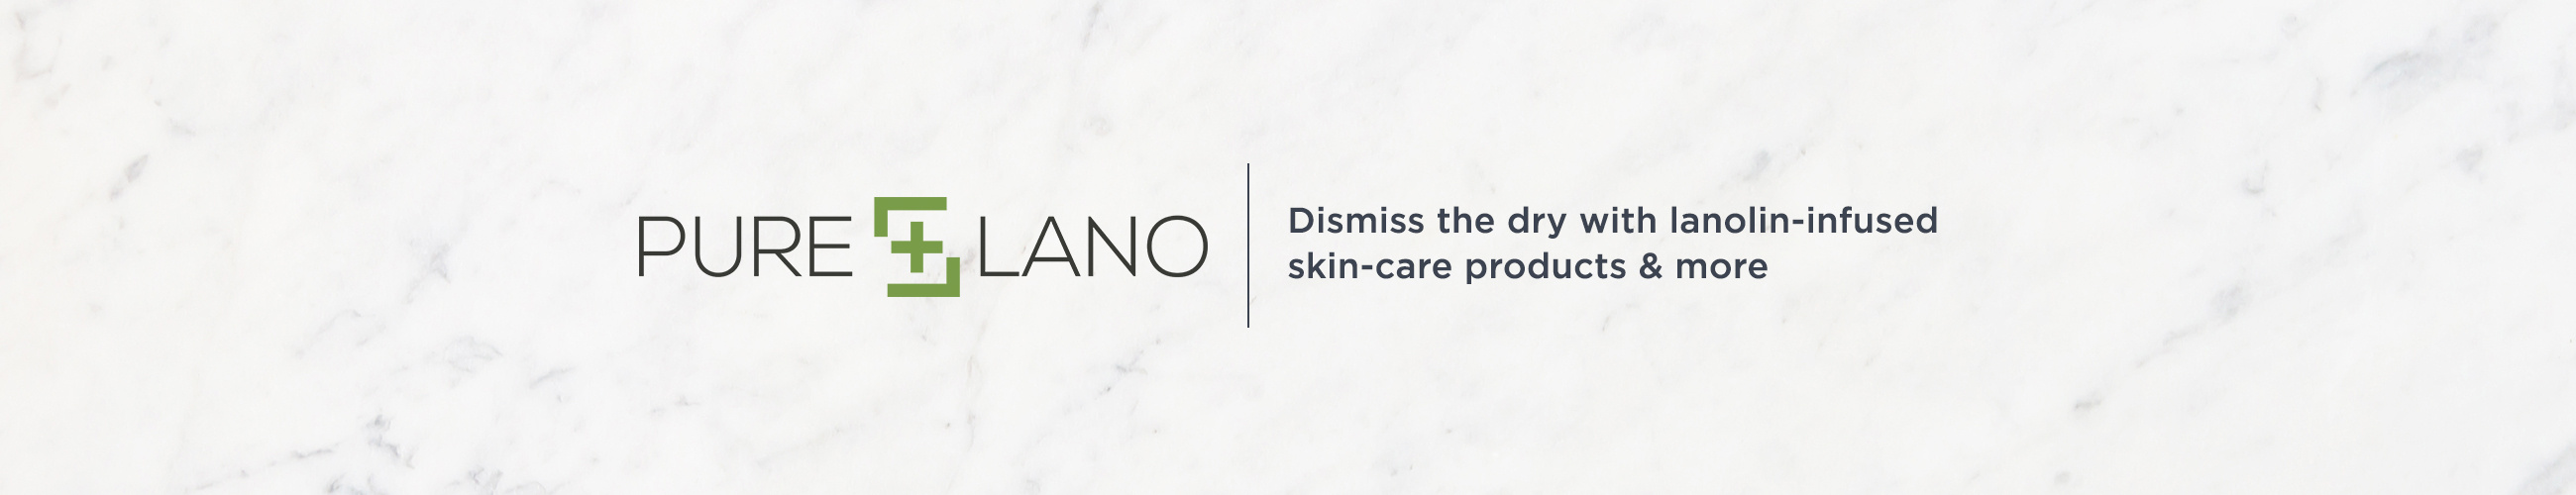 Pure Lano. Dismiss the dry with lanolin-infused skin-care products & more